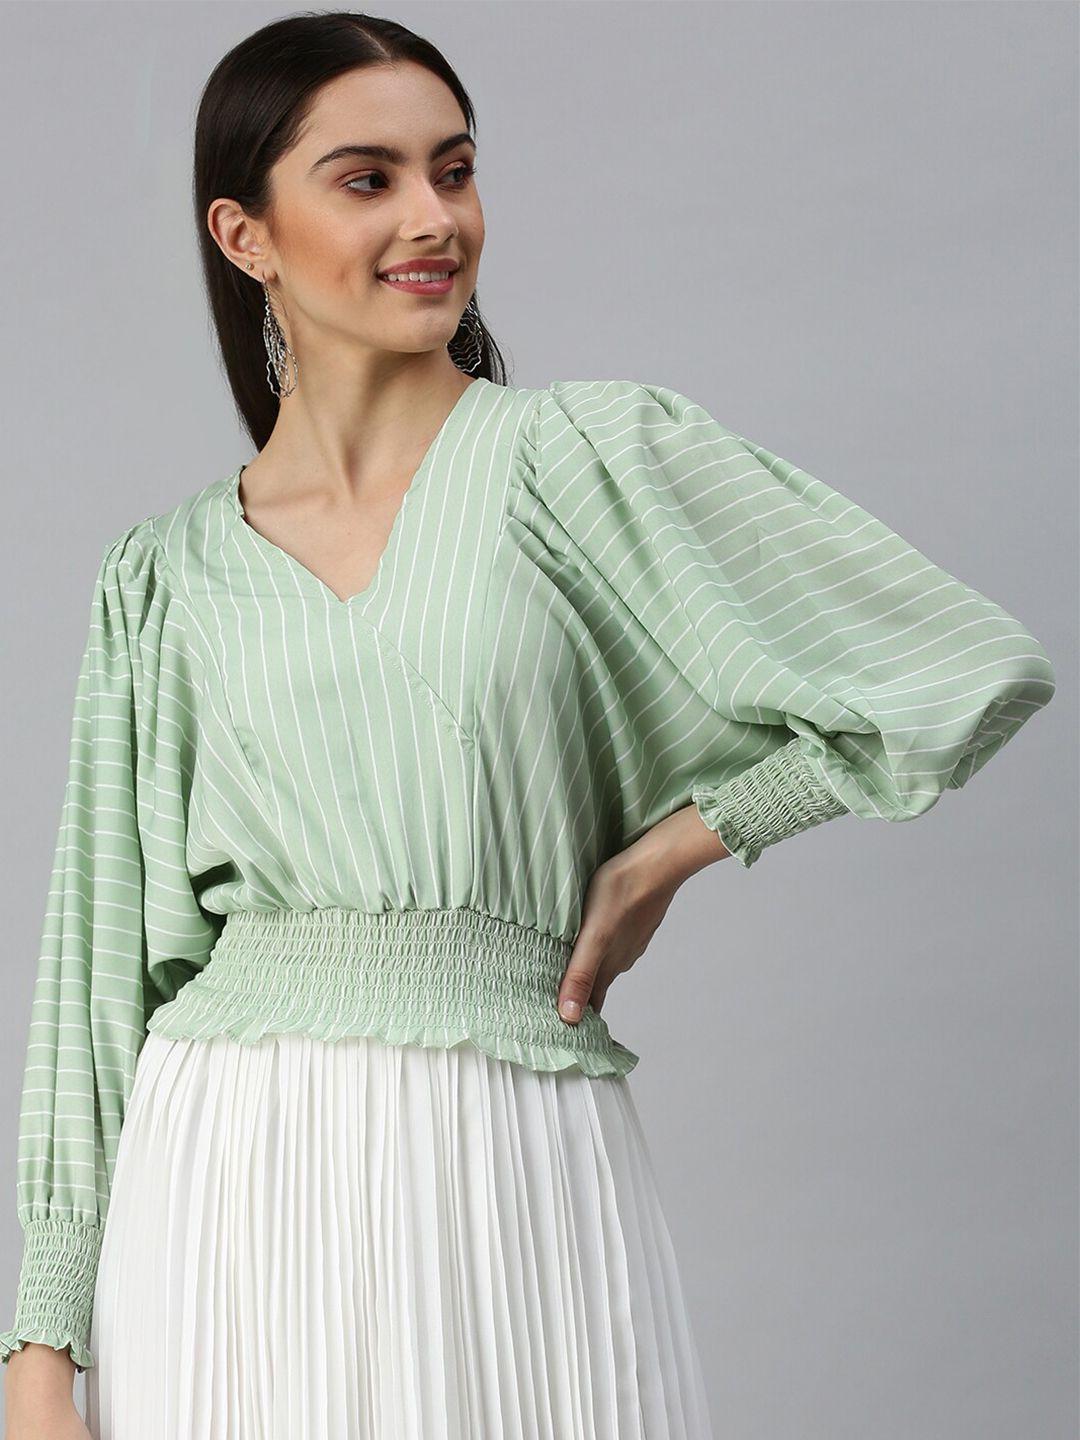 showoff-striped-smocking-puff-sleeves-blouson-top